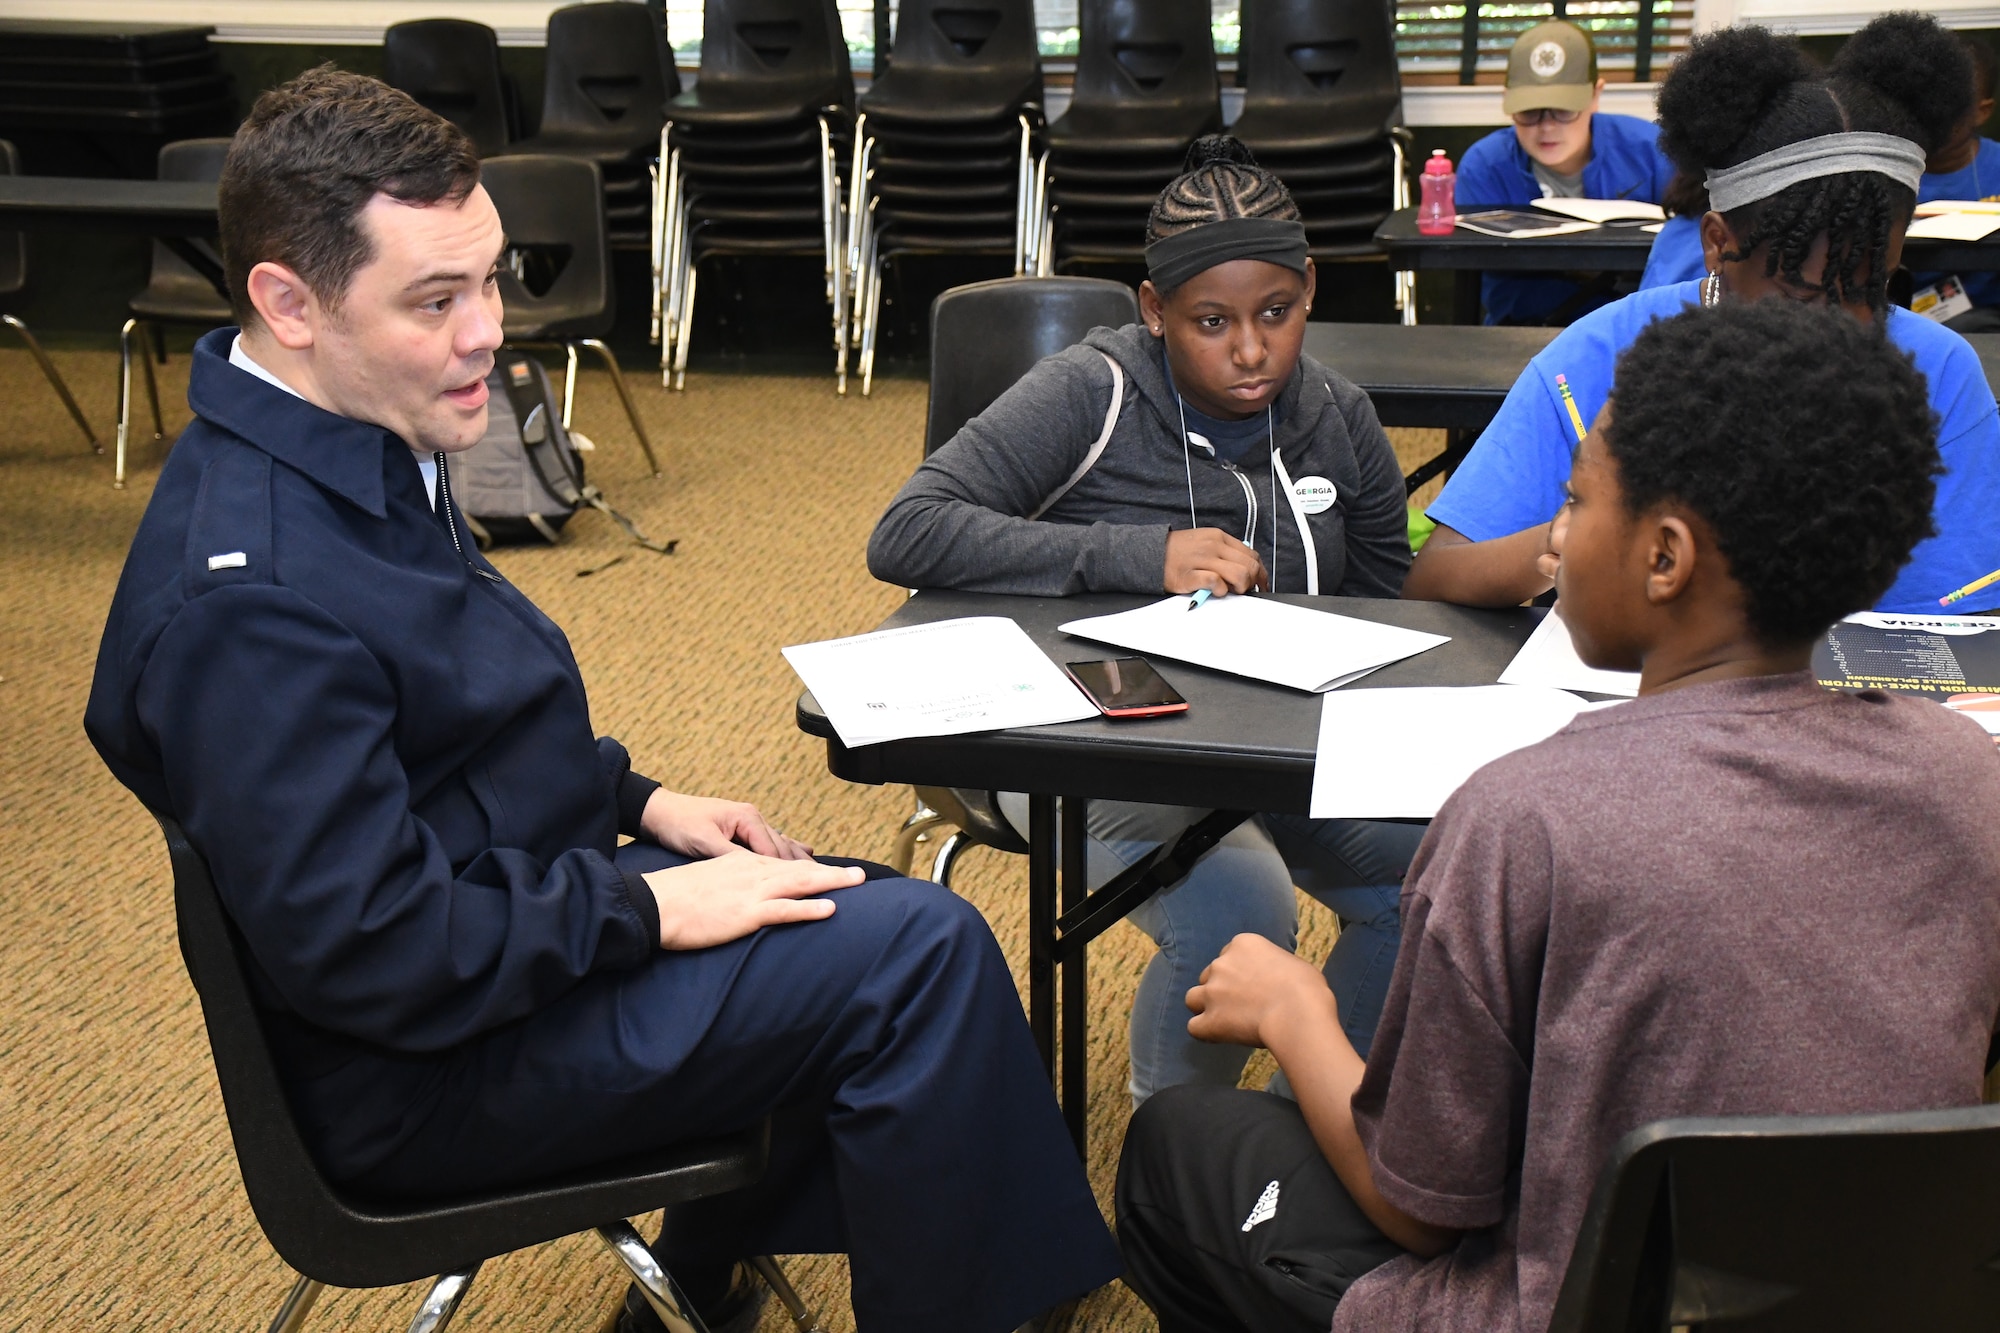 1st Lt. Alan Abernethy, public affairs chief at the 94th Airlift Wing, shares space weather information to assist youth in their space-focused mission at Rock Eagle 4-H Center in Eatonton, Ga., Aug 17, 2019.  The Air Force and space focused programming allowed youth to question and hear from Air Force personnel.    (U.S. Air Force photo by 1st Lt. Casey D. Mull)